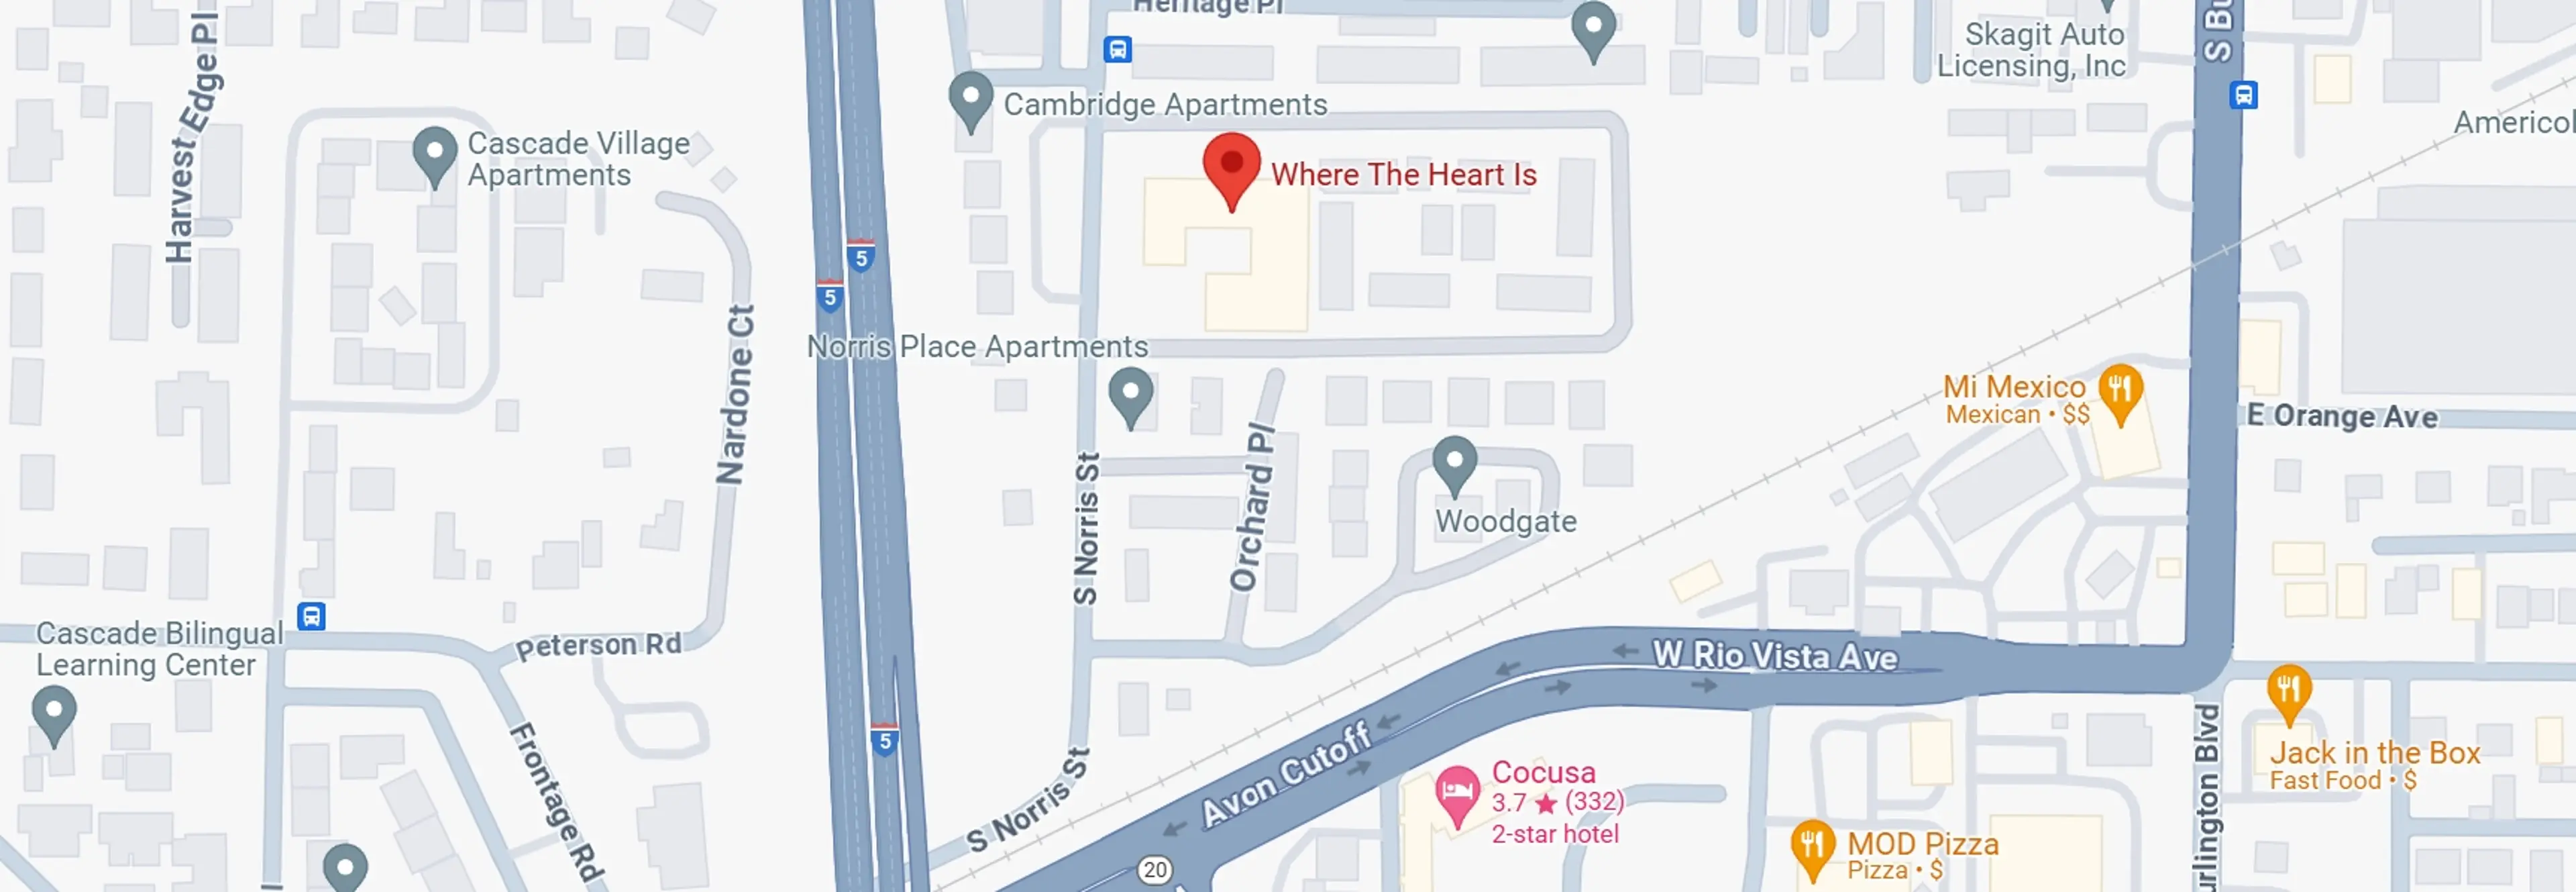 Where the Heart Is Map